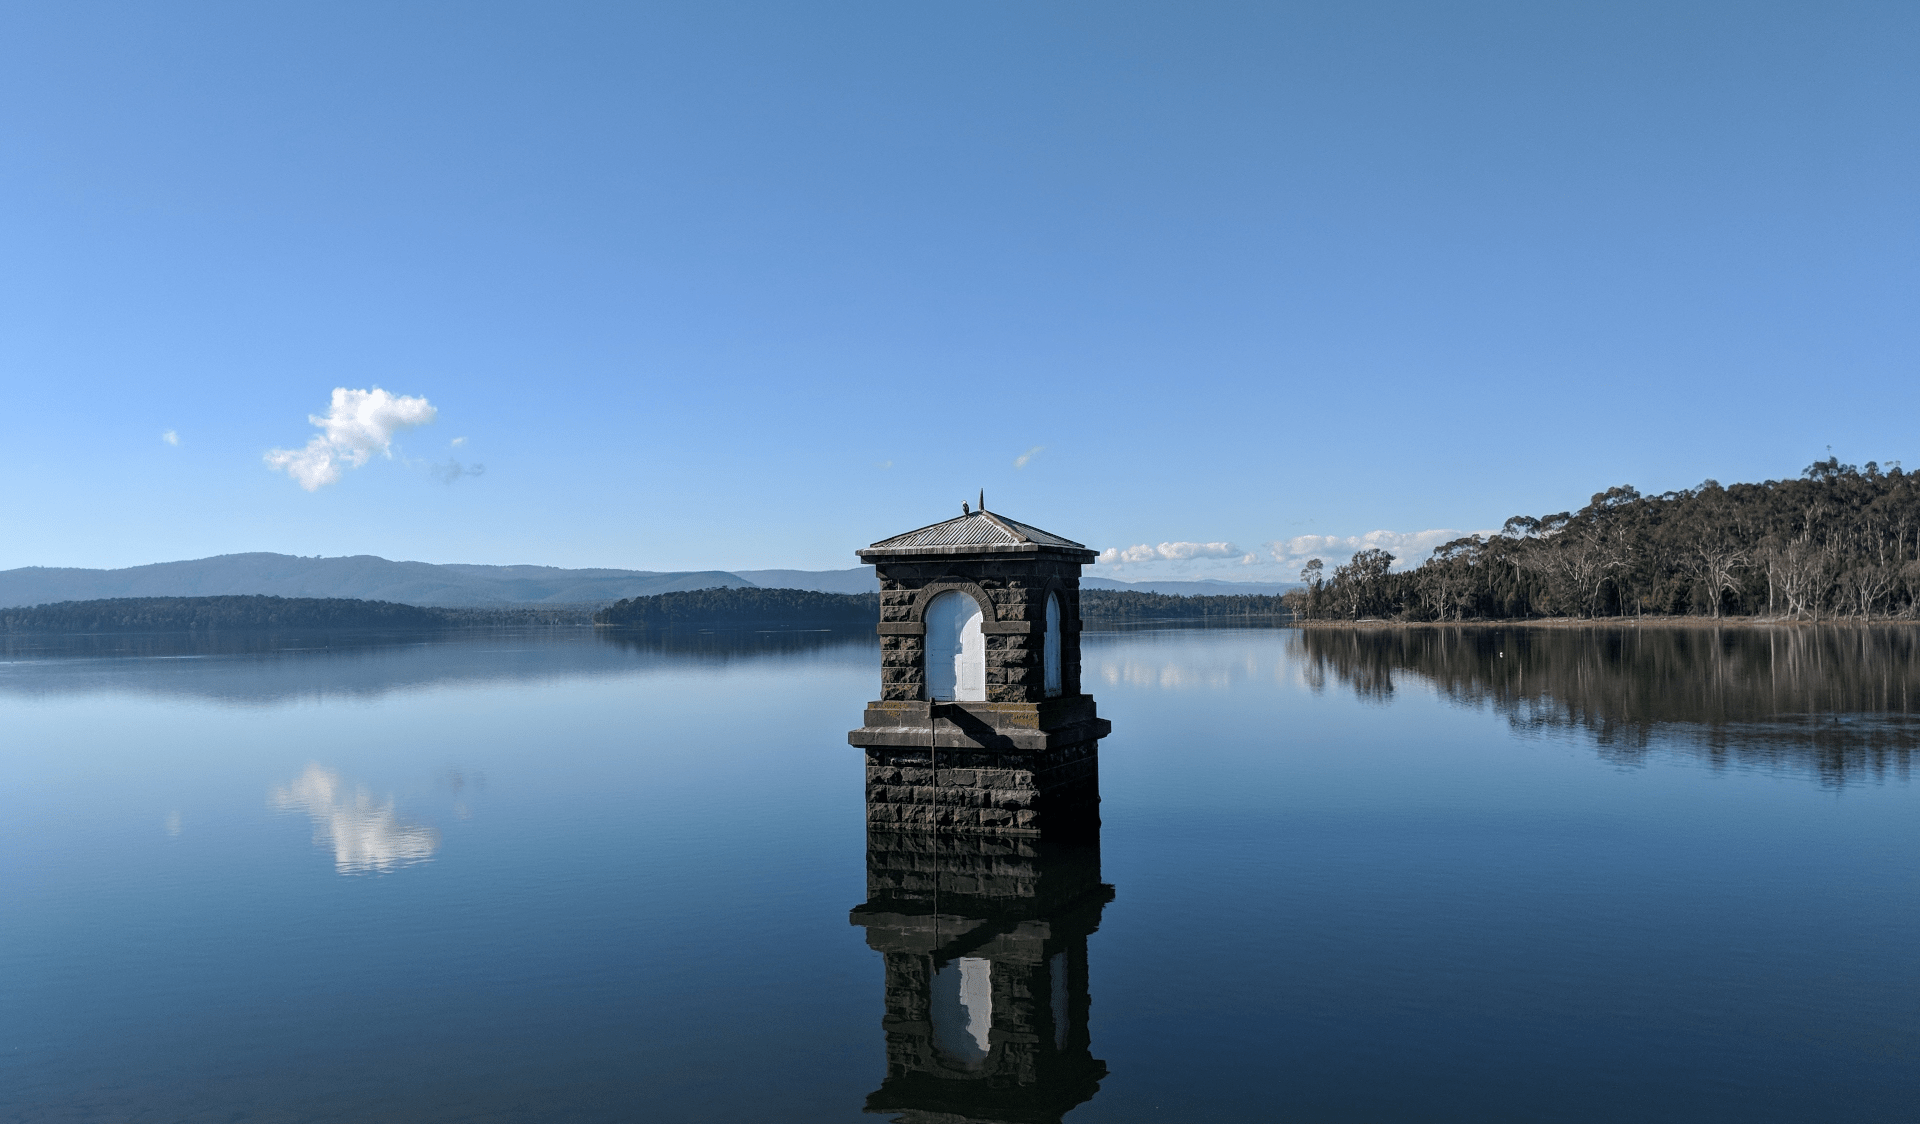 A structure on the water in Yan Yean Reservoir